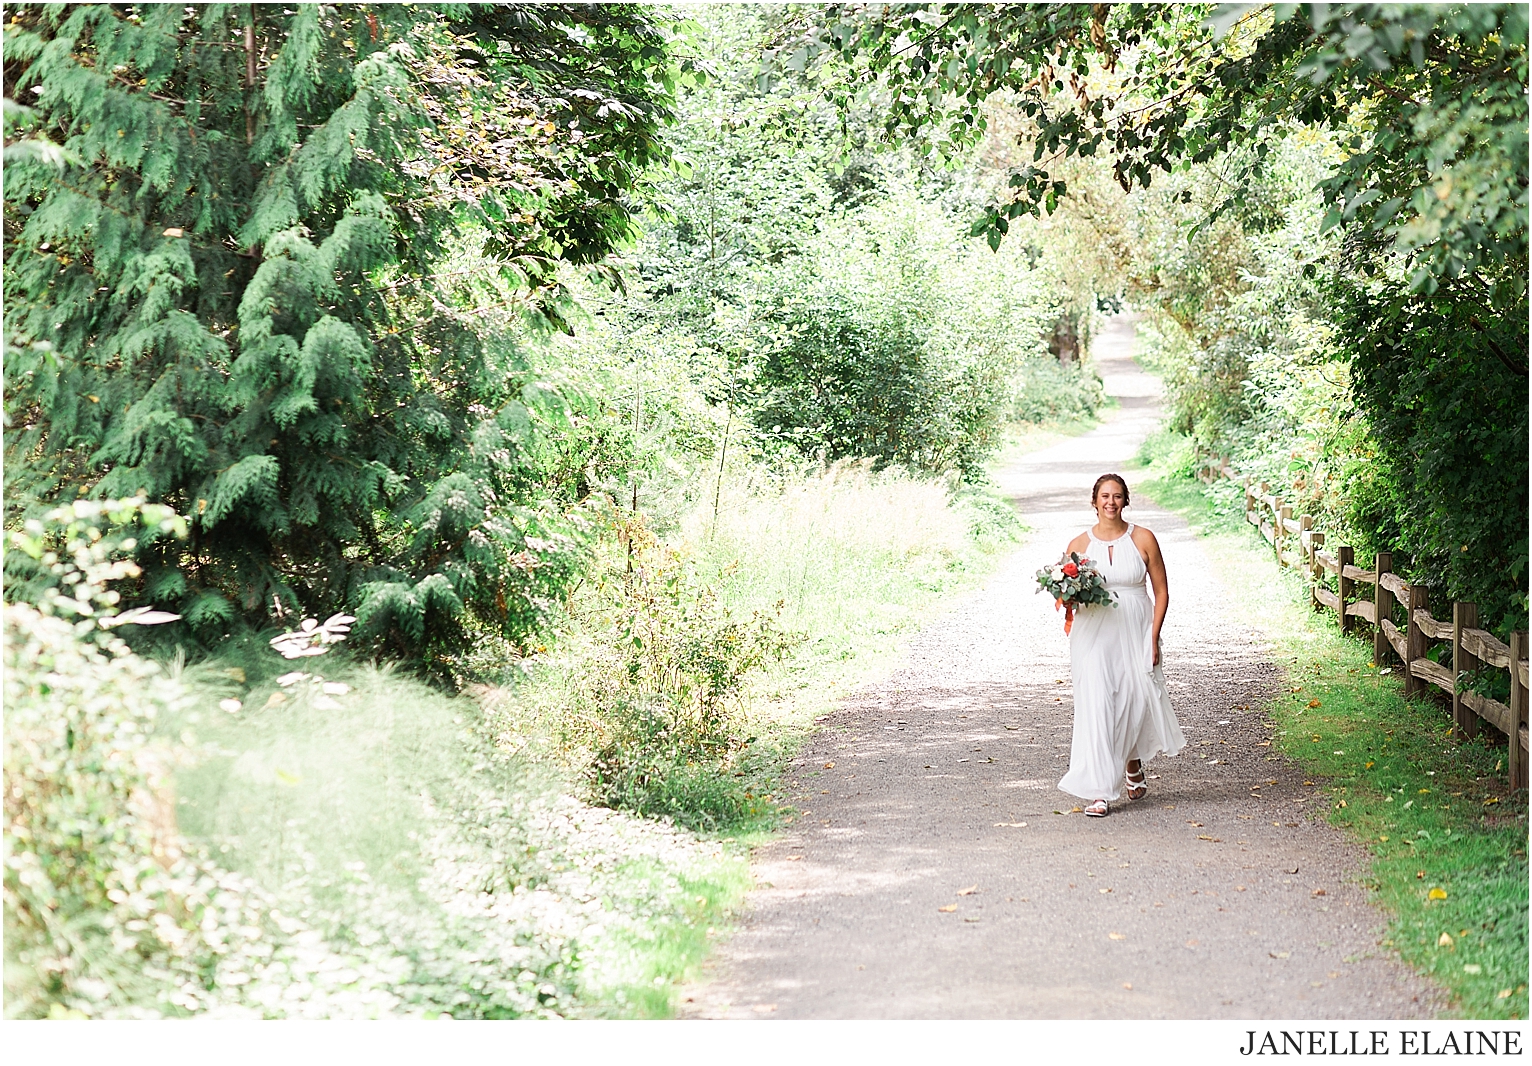 liz and christina lanning-first look and portraits-luther burbank park-janelle elaine photography-10.jpg